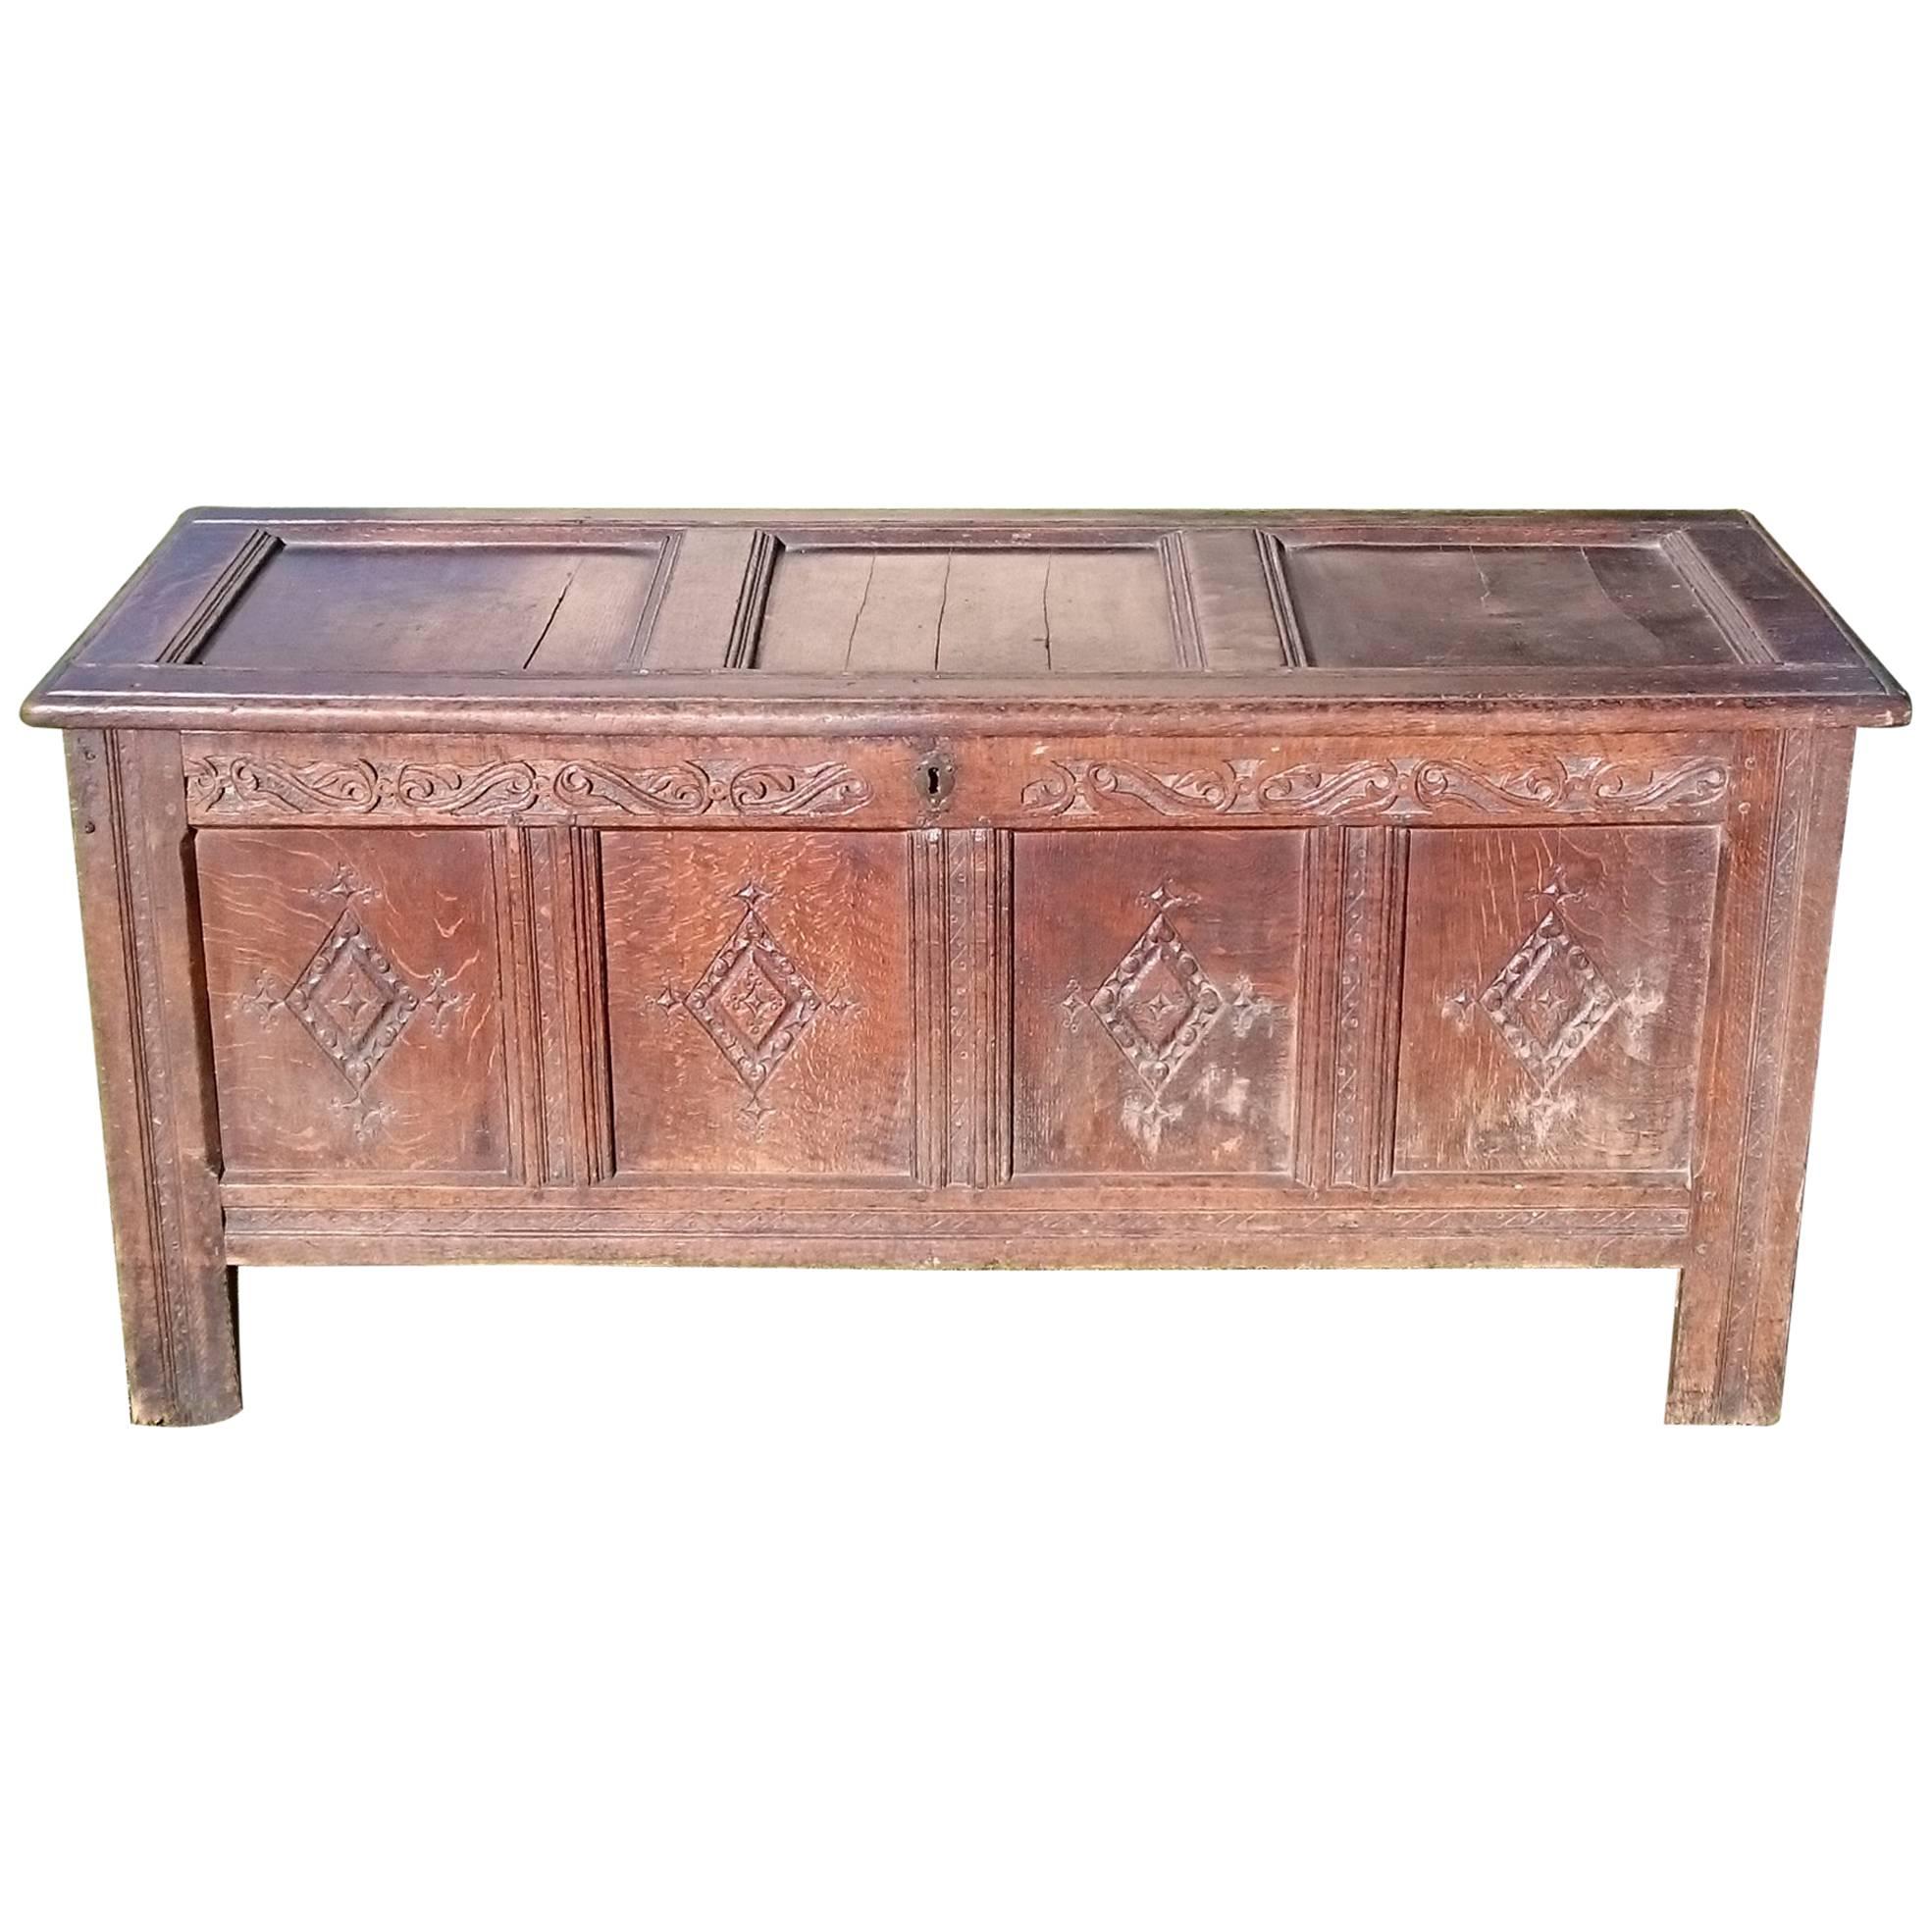 17th Century William and Mary Period Oak Antique Coffer Blanket Box For Sale